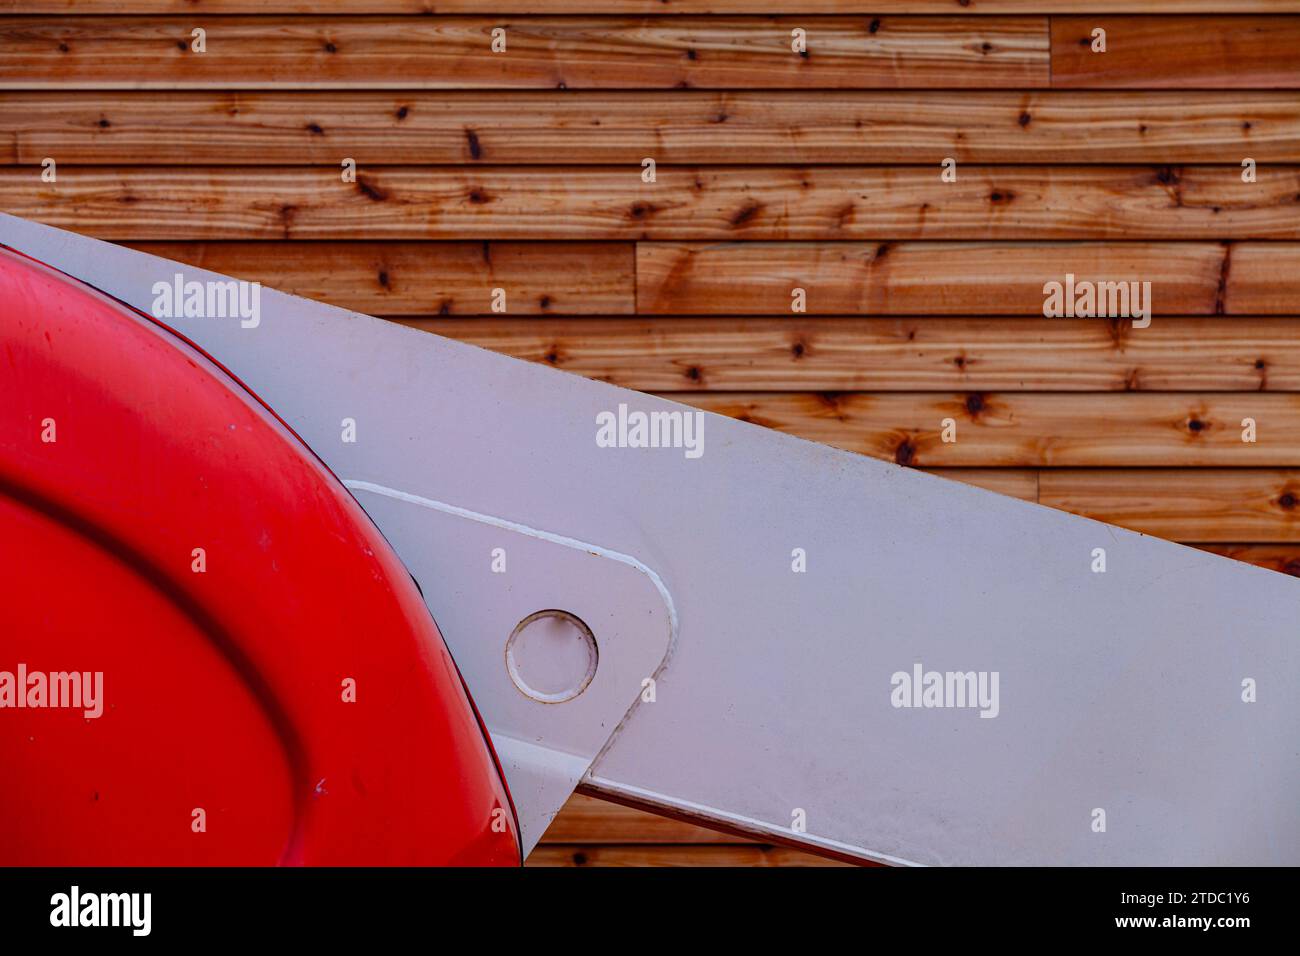 Abstract image of an industrial machine against a wood background in Steveston British Columbia Canada Stock Photo